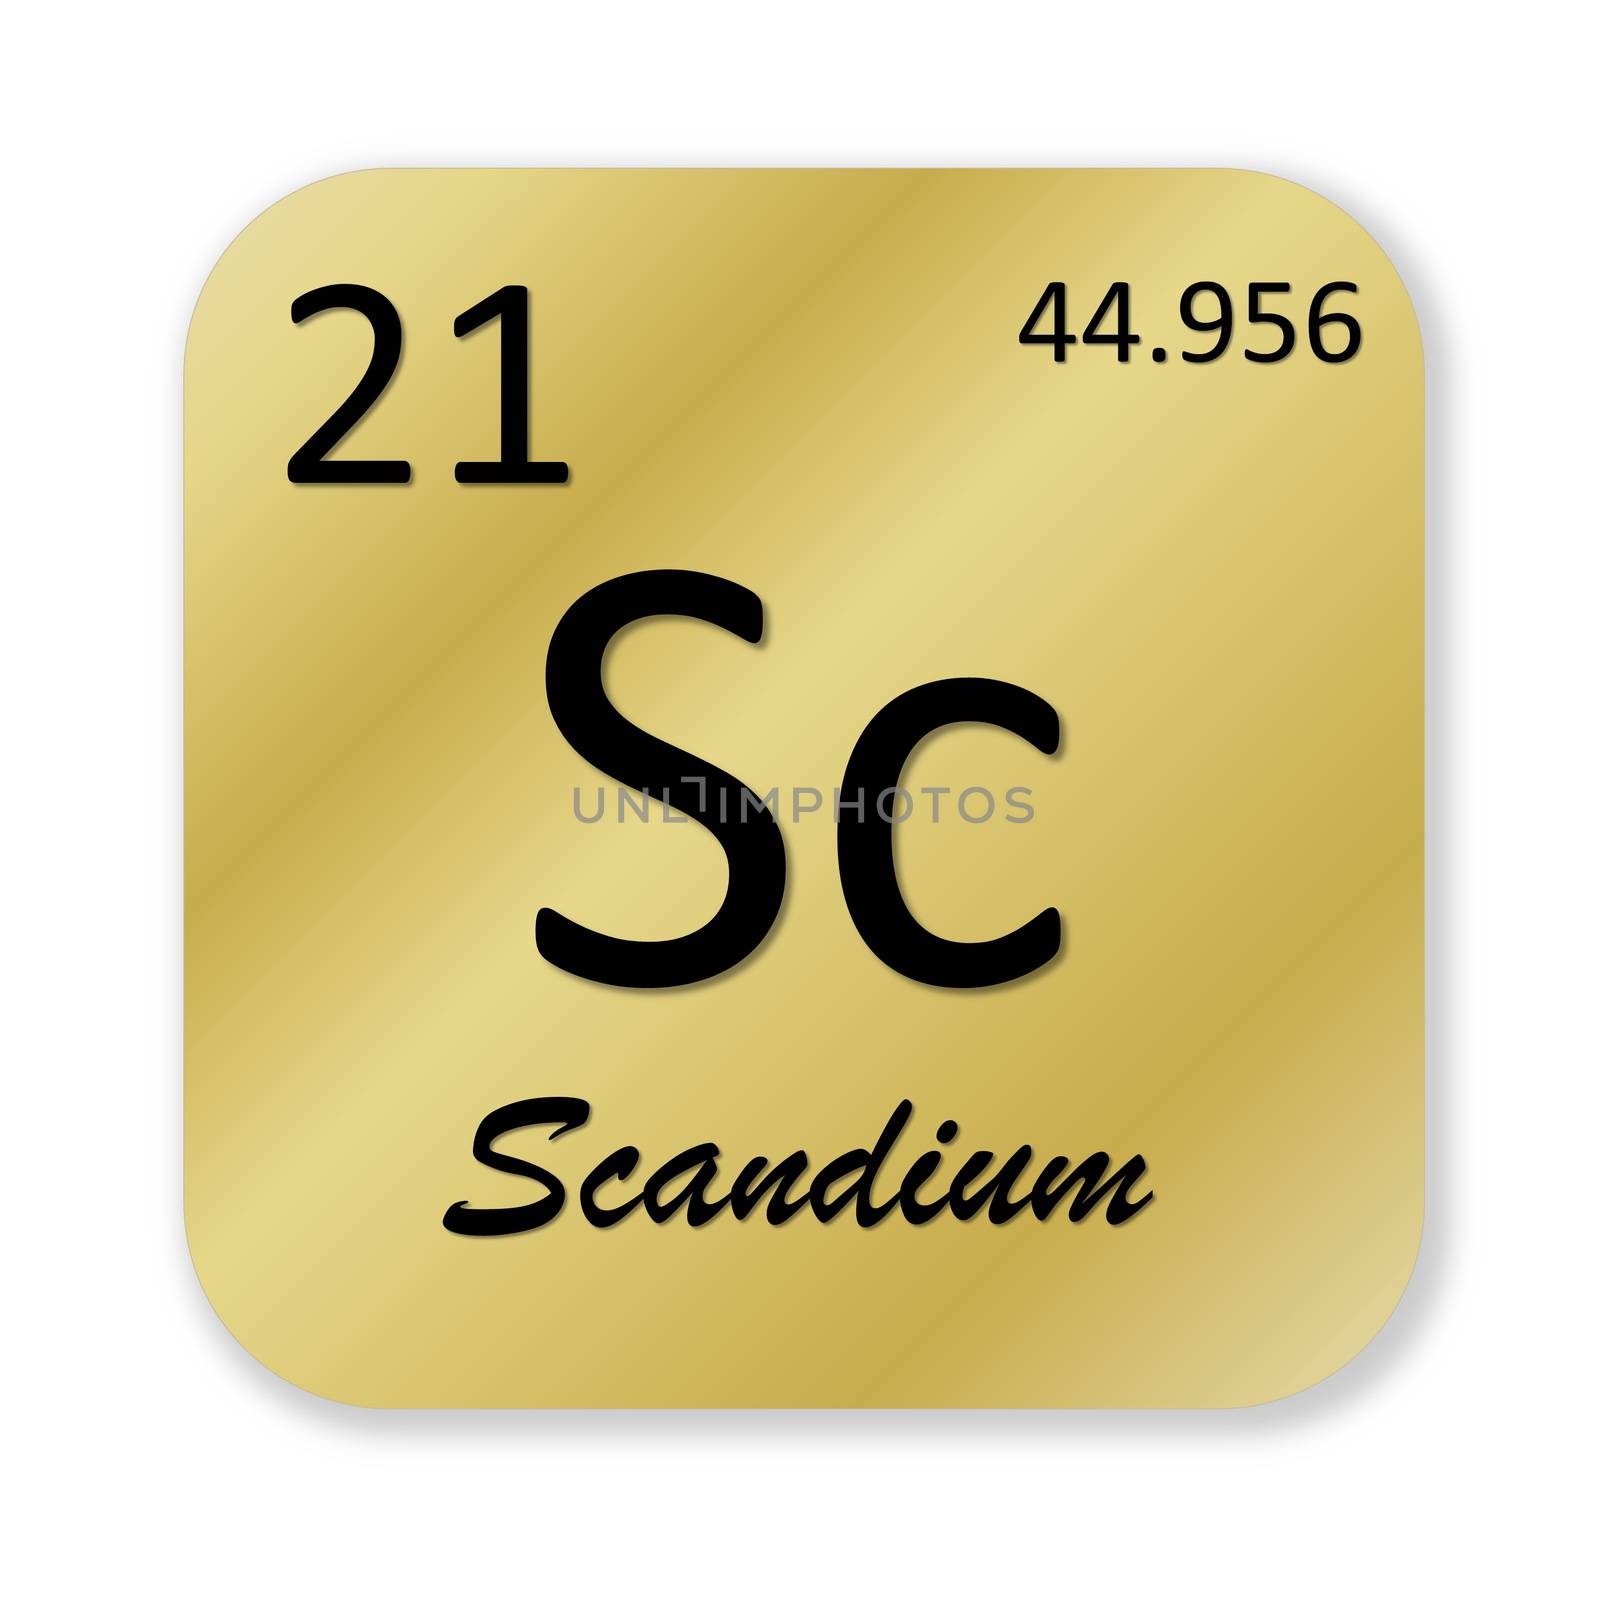 Black scandium element into golden square shape isolated in white background